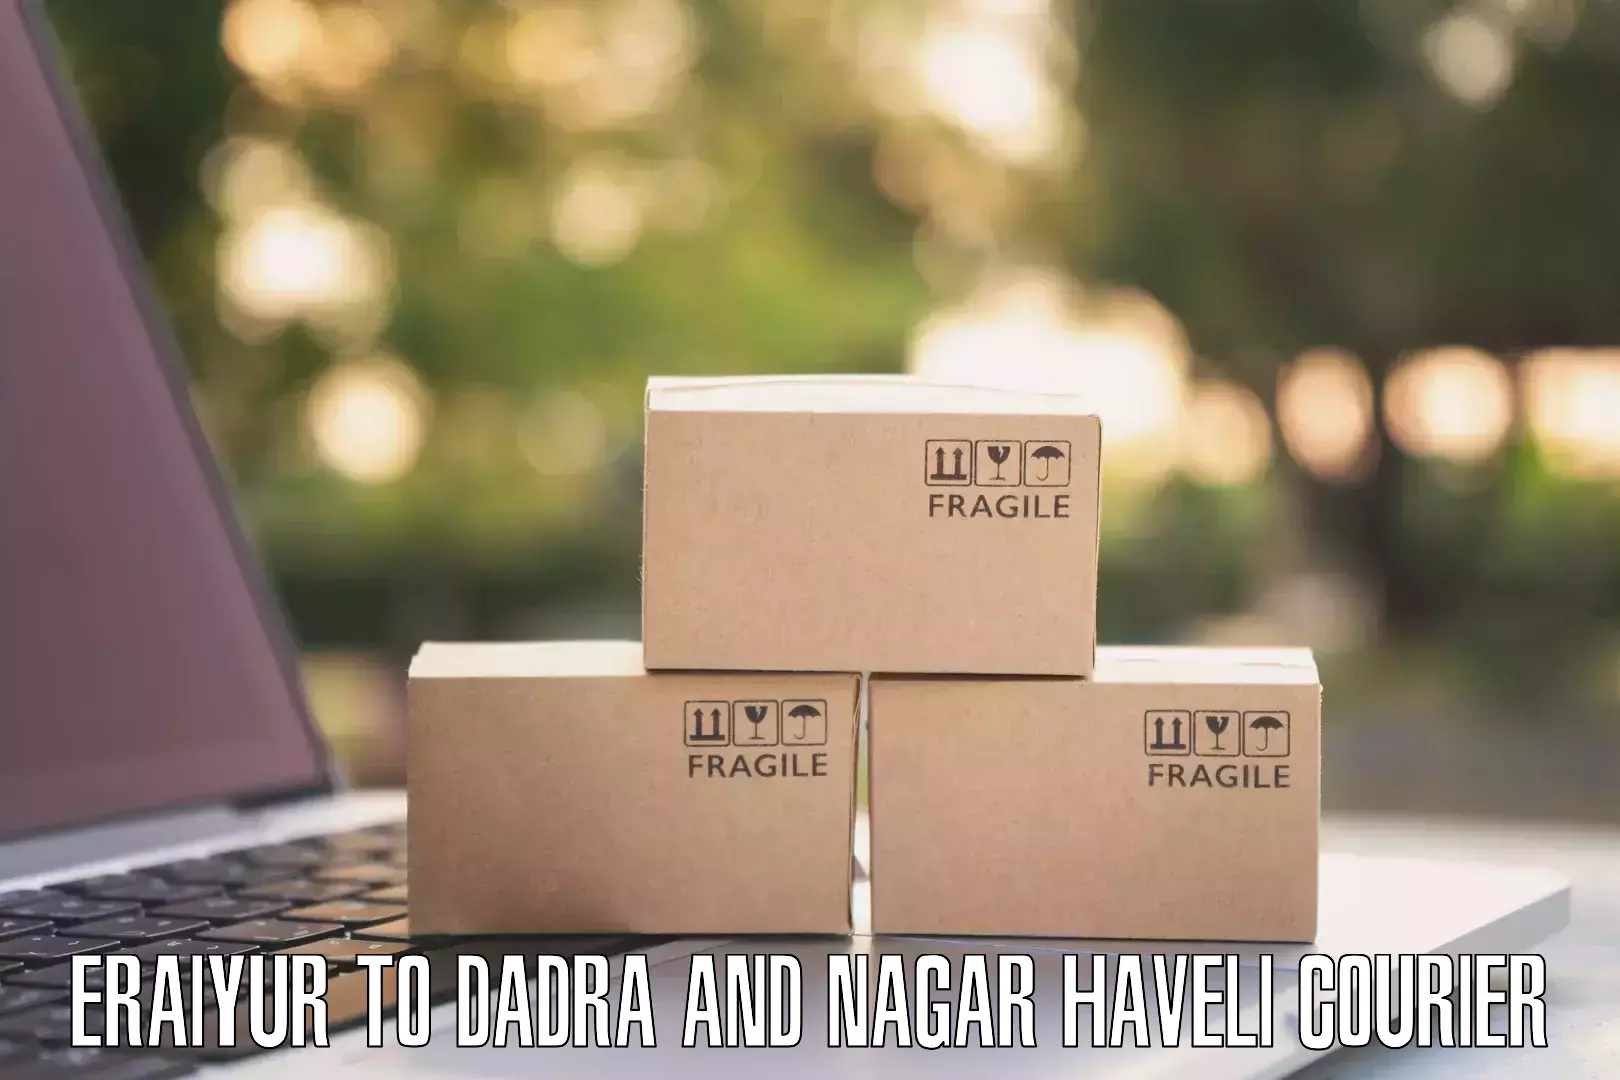 User-friendly delivery service in Eraiyur to Dadra and Nagar Haveli